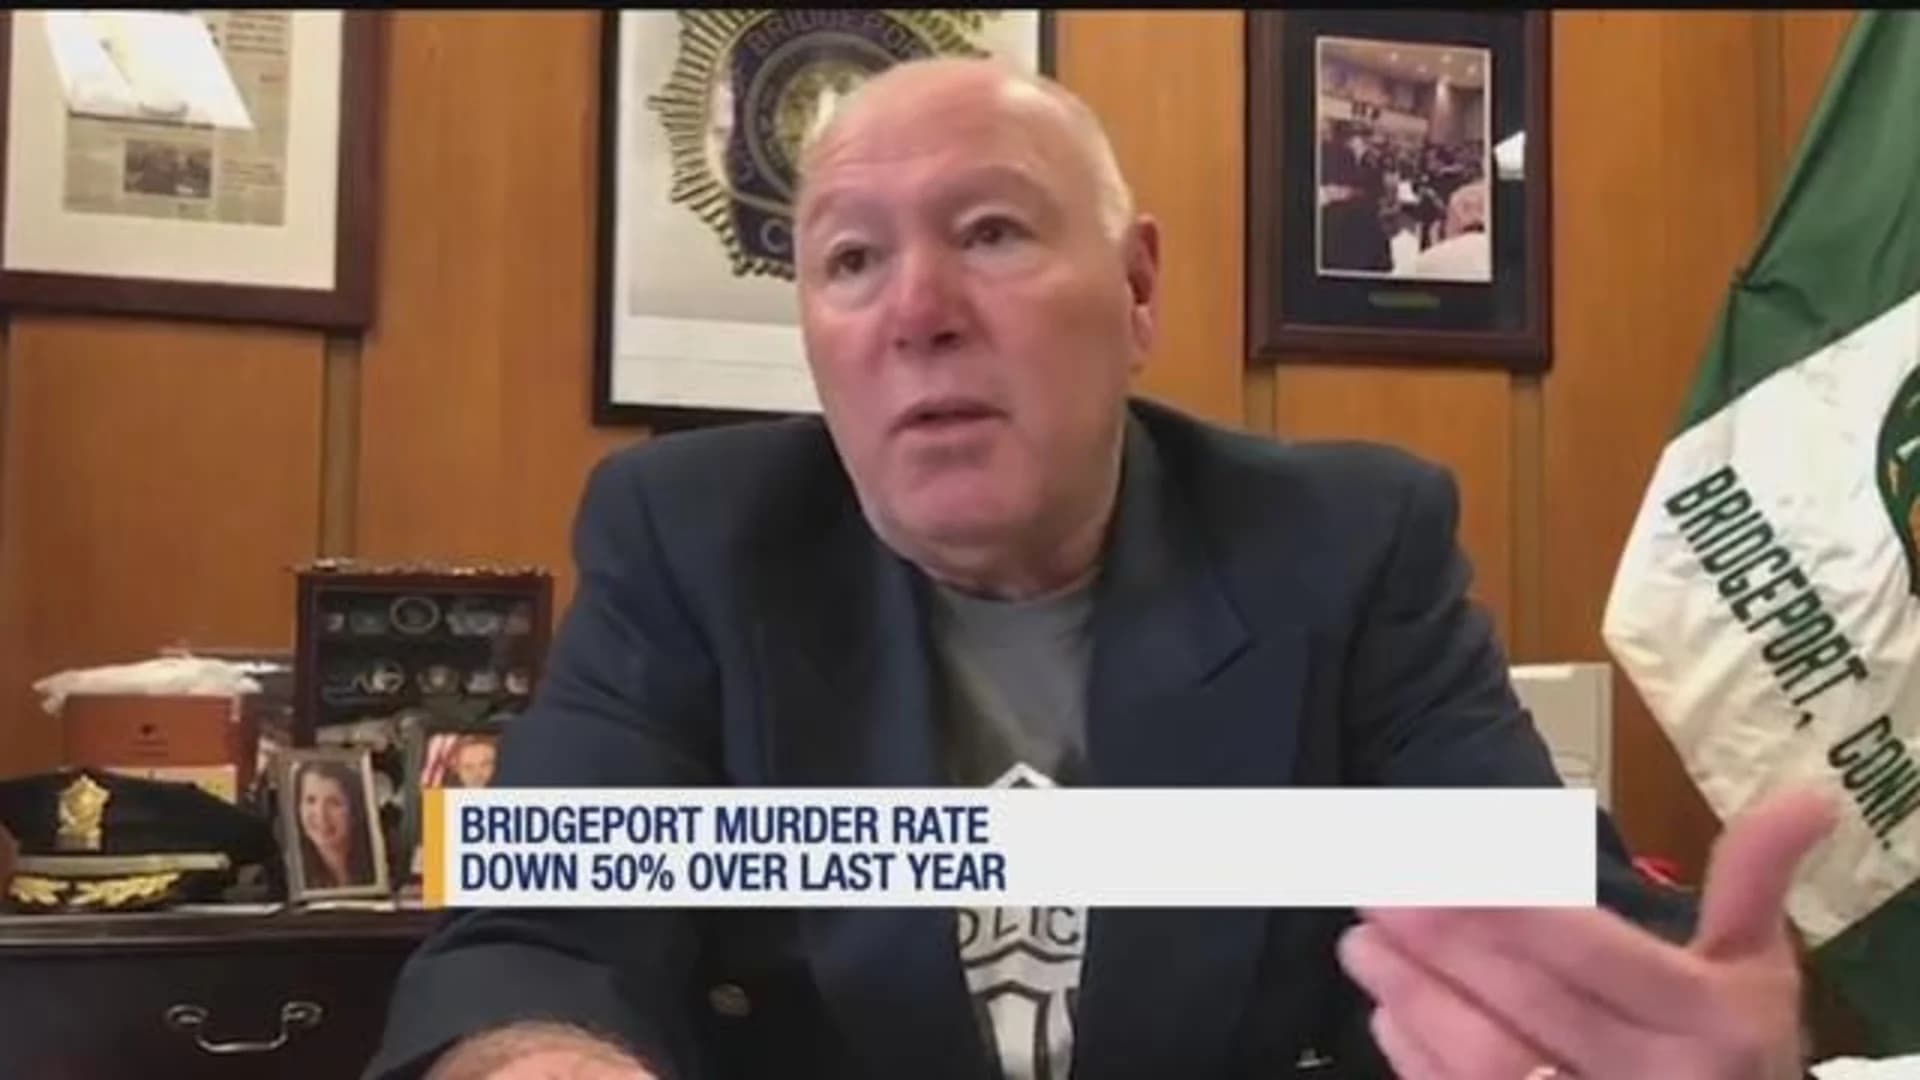 Police chief on Bridgeport homicides: ‘We need to do better’